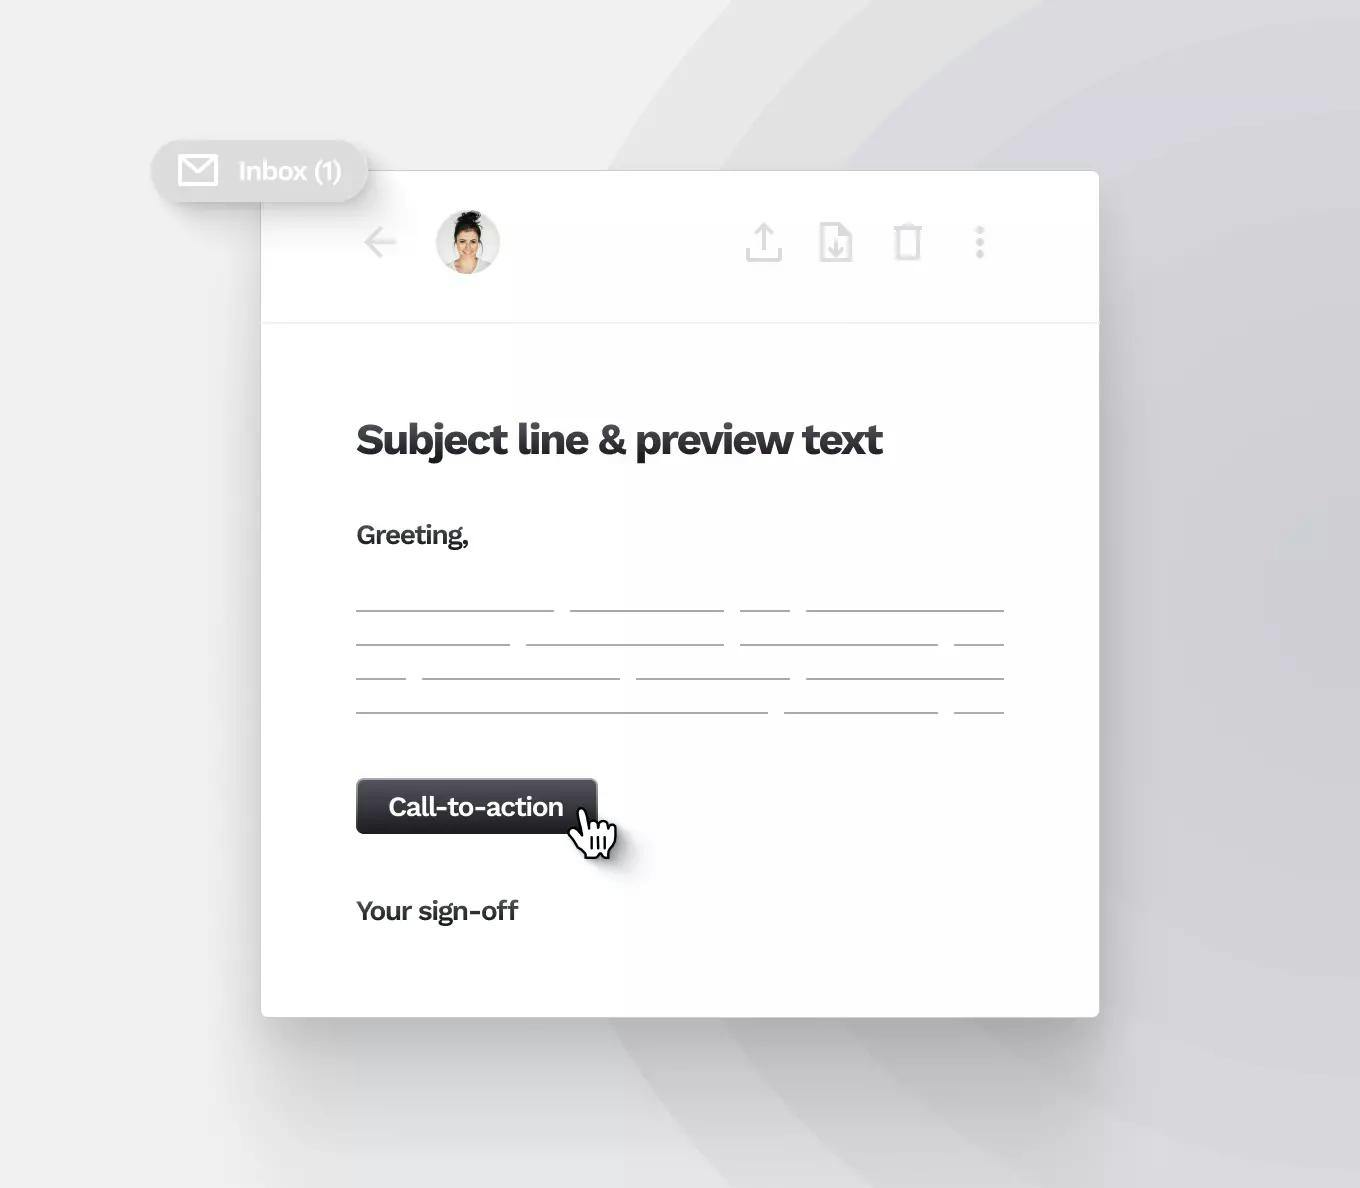 An email sample template, showing the essential elements of email copywriting: the subject line and preview text, the greeting, body copy, a call-to-action button, and a sign-off.